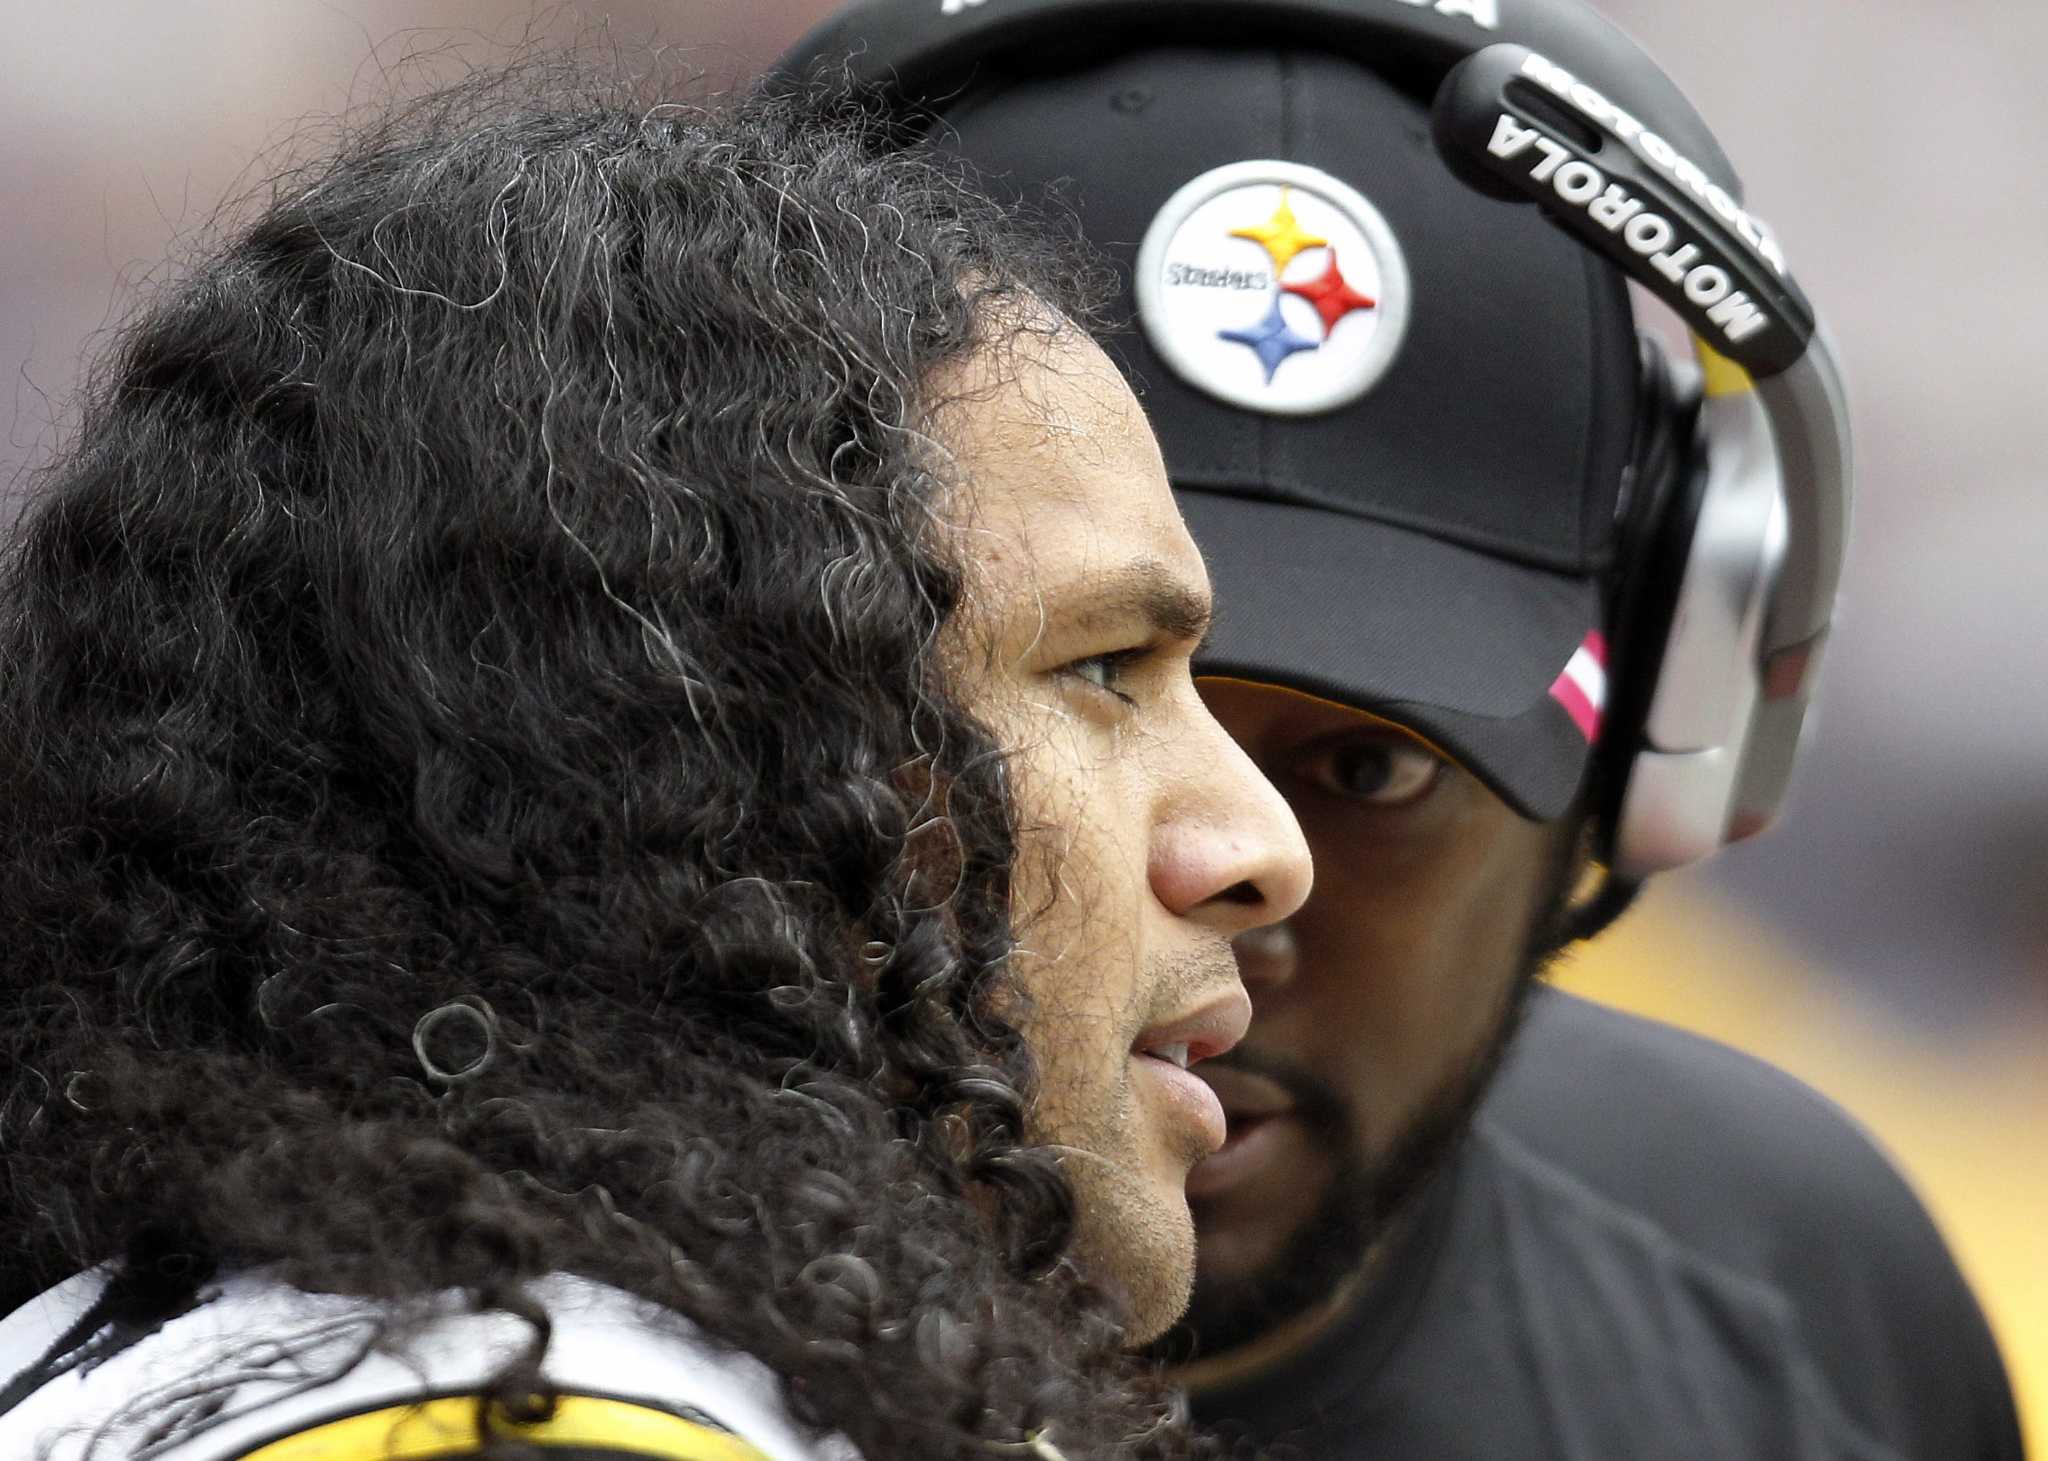 Pittsburgh Steelers safety Troy Polamalu retires